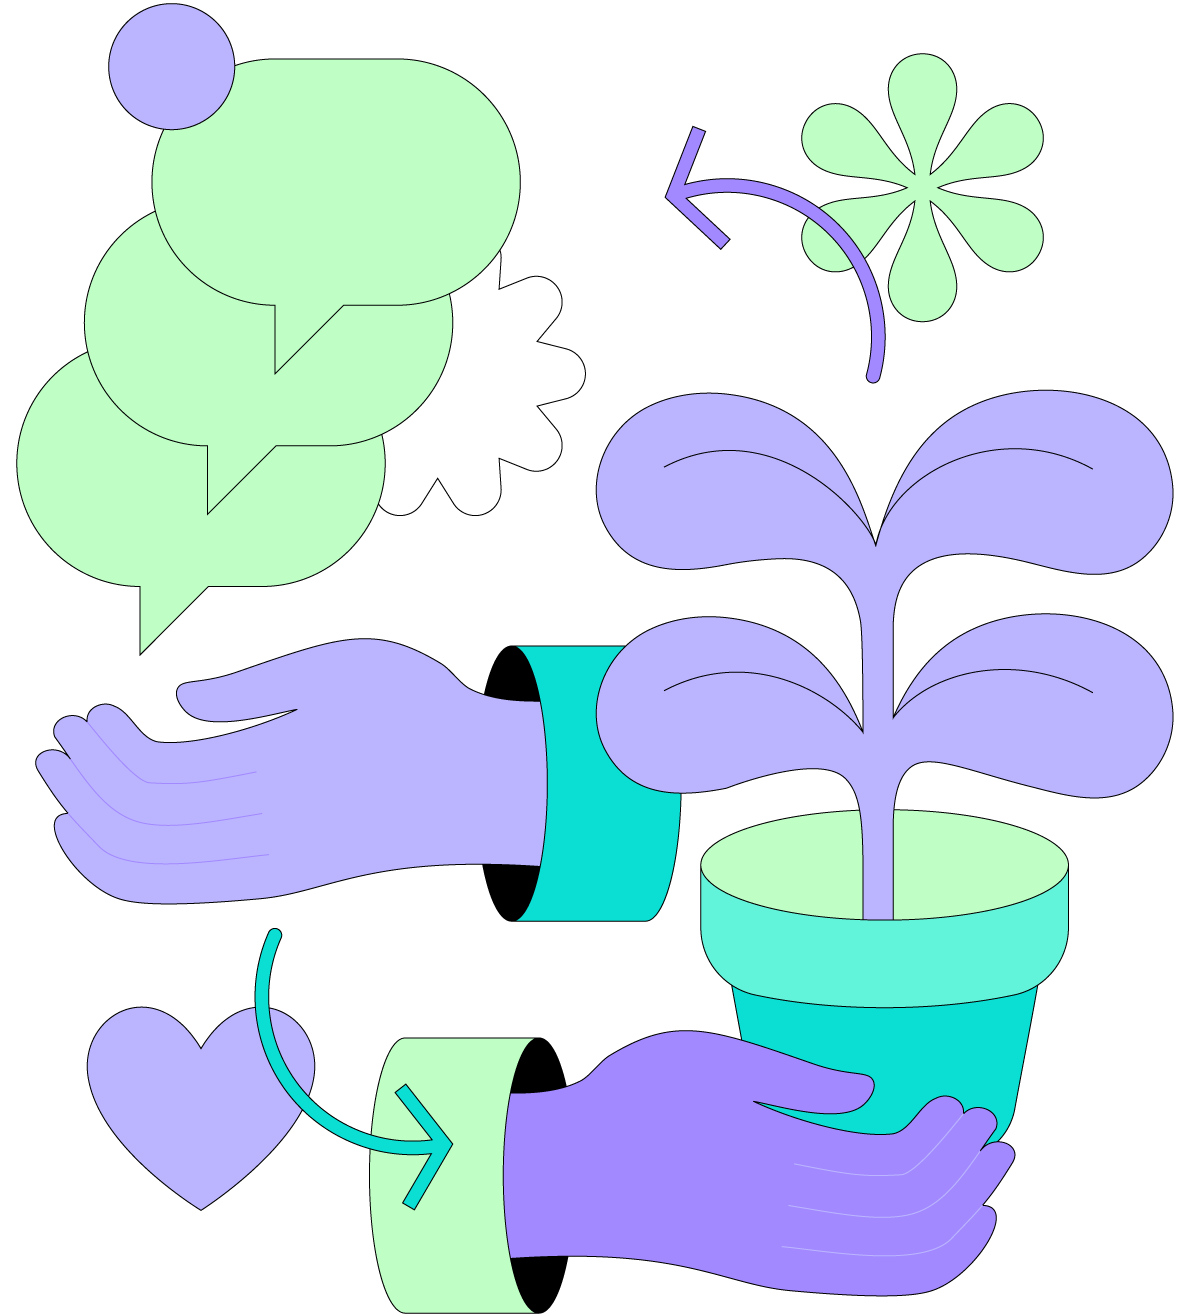 A purple cartoon hand holds a pot plant. Other symbols – a cartoon heart, a flower, and speech bubbles – surround the plant